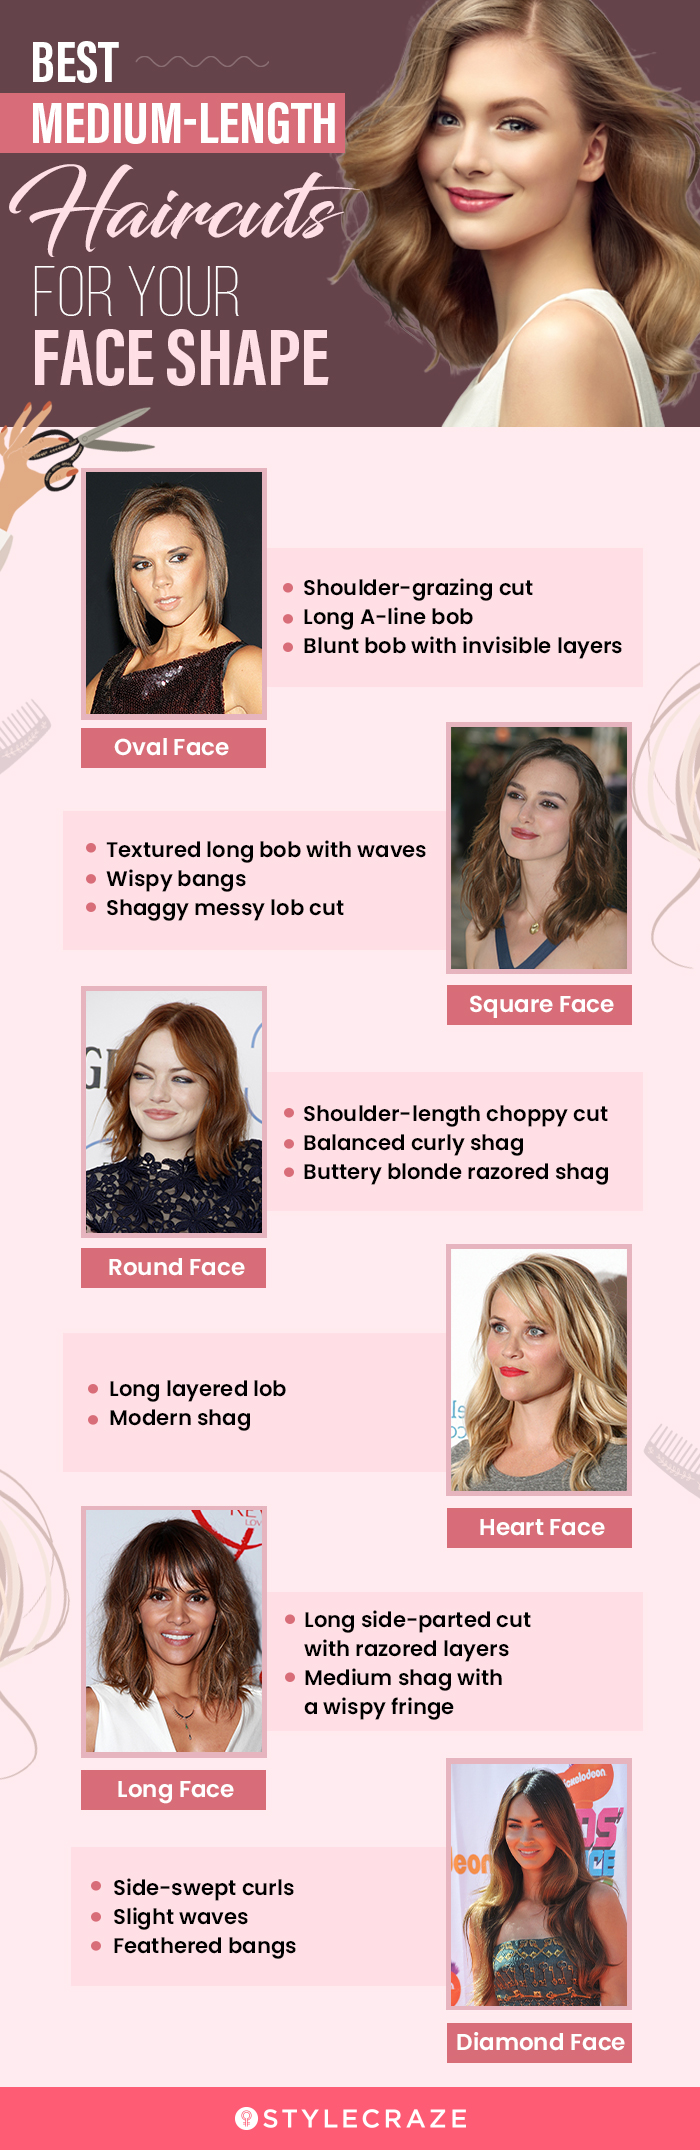 best haircuts for your face shape [infographic]